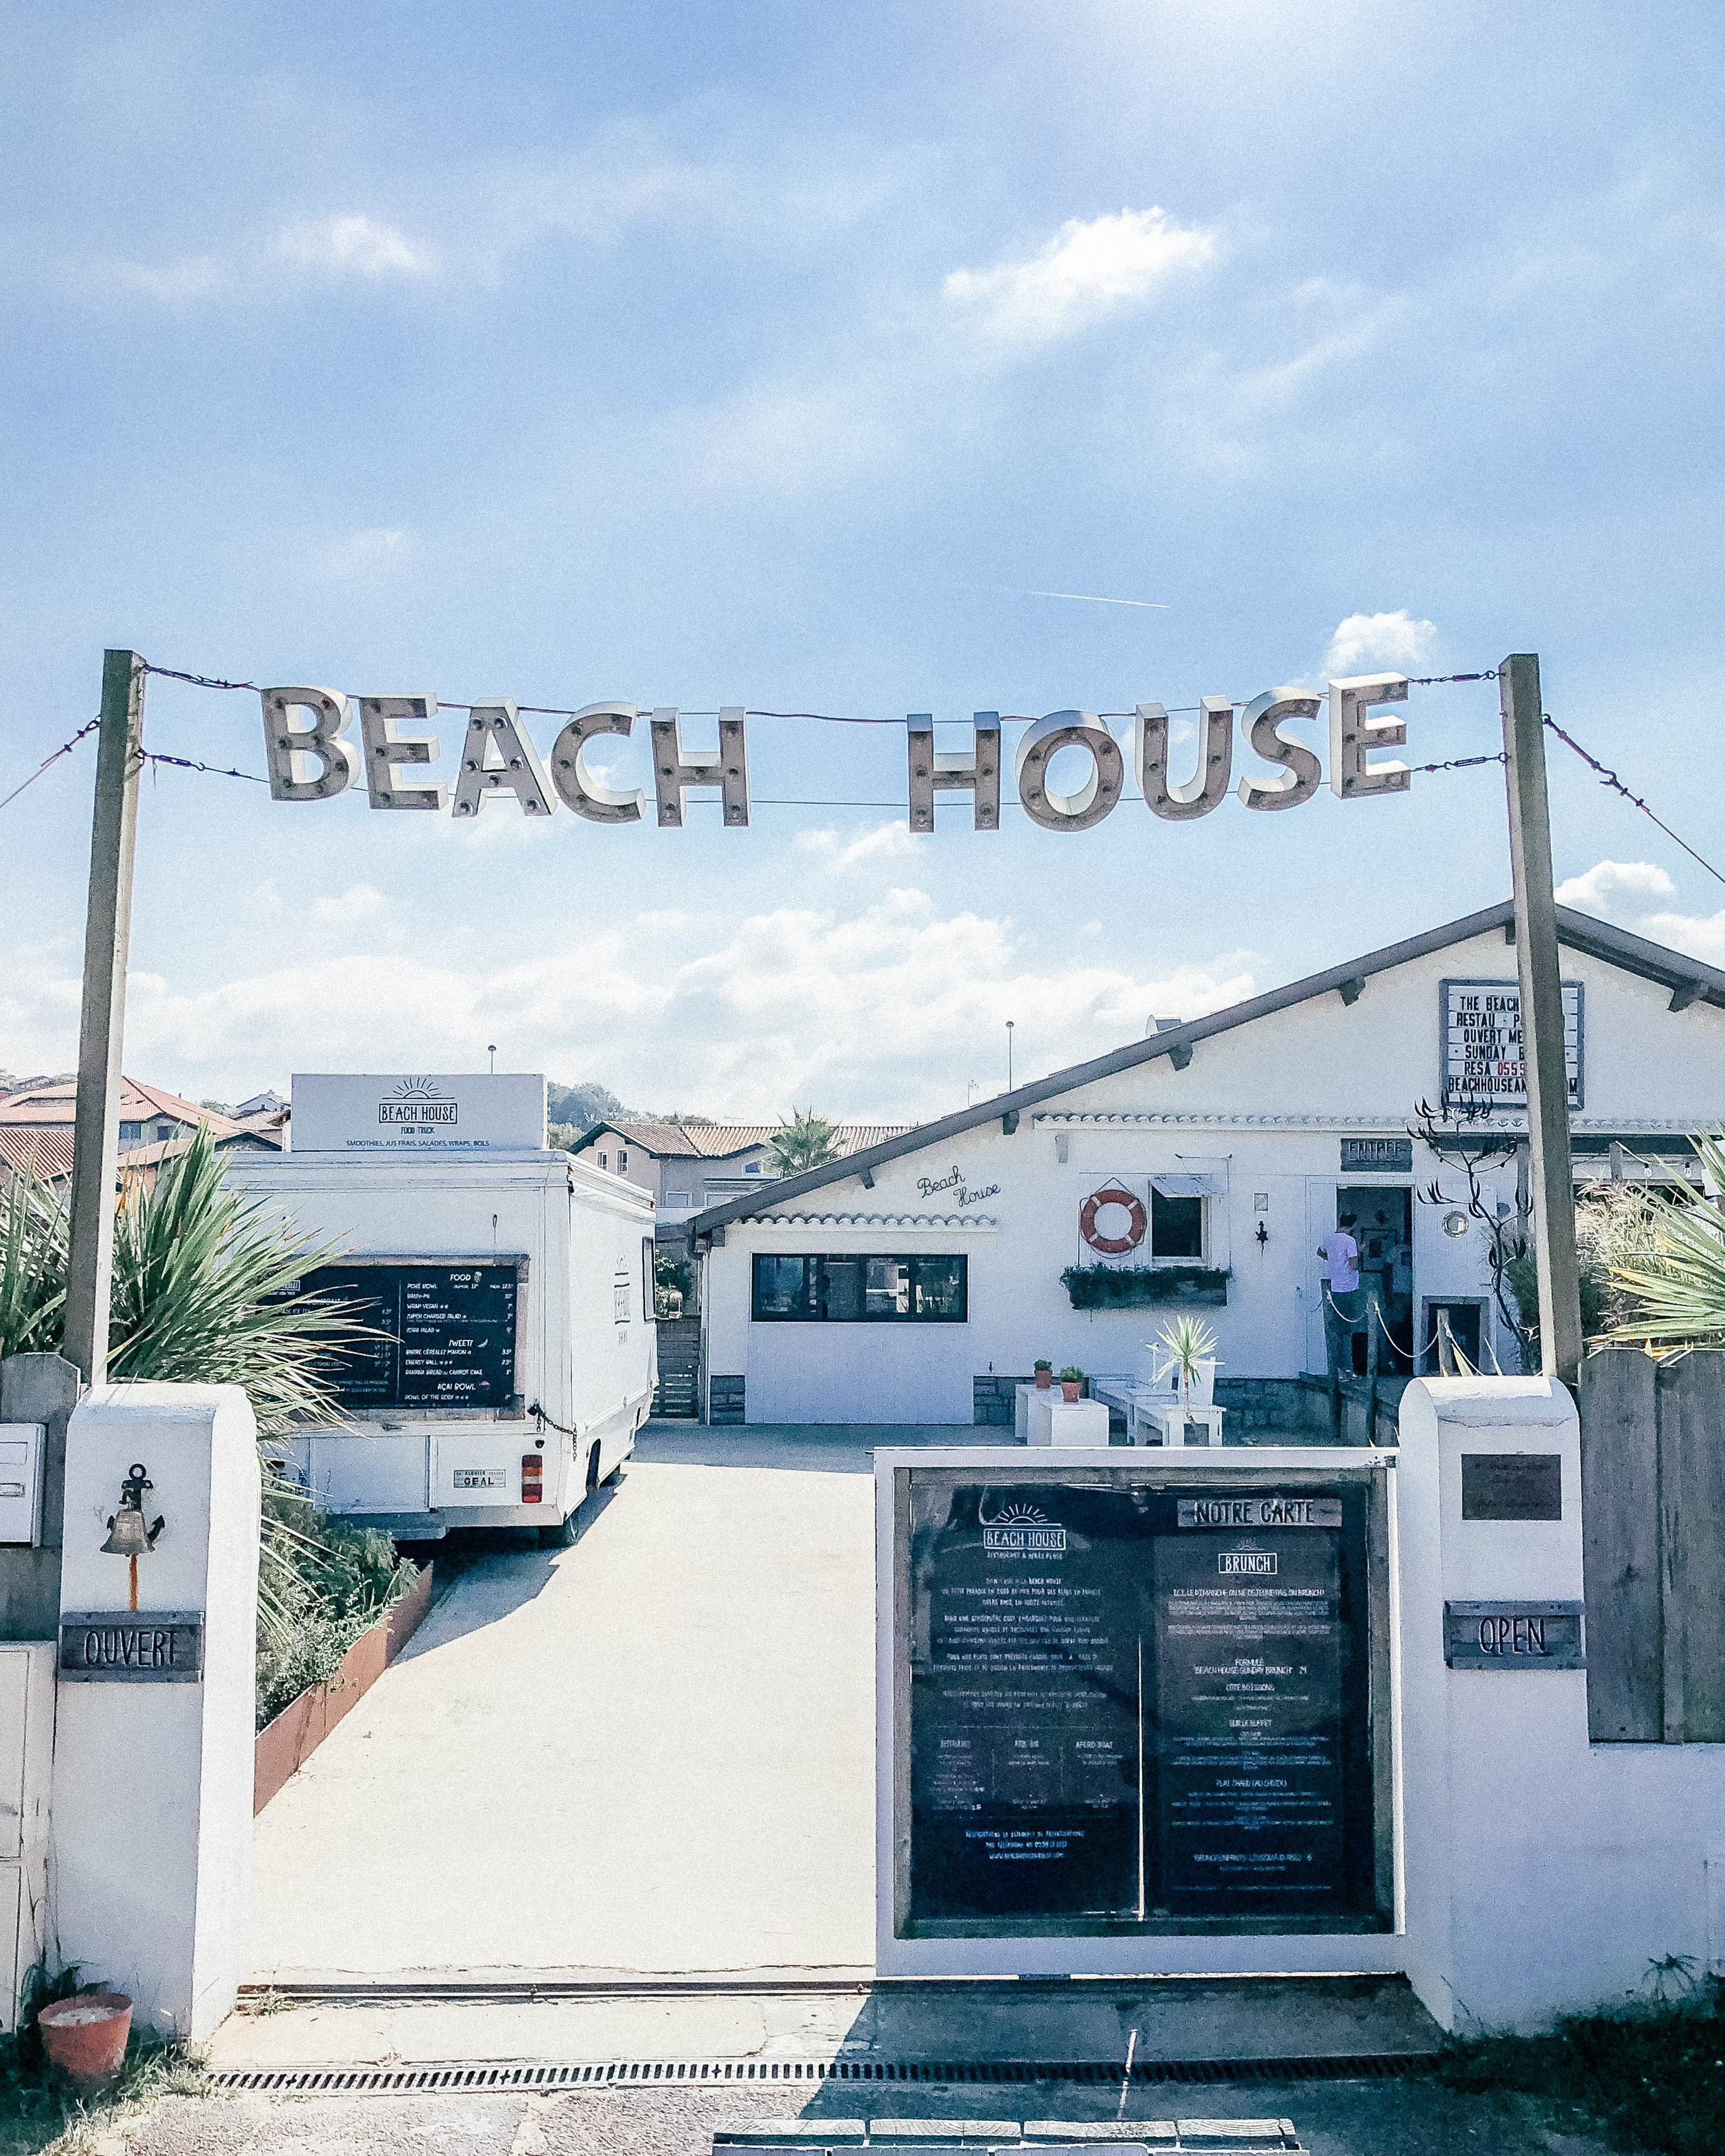 The Beach House Entrance - Anglet - Basque Country - France